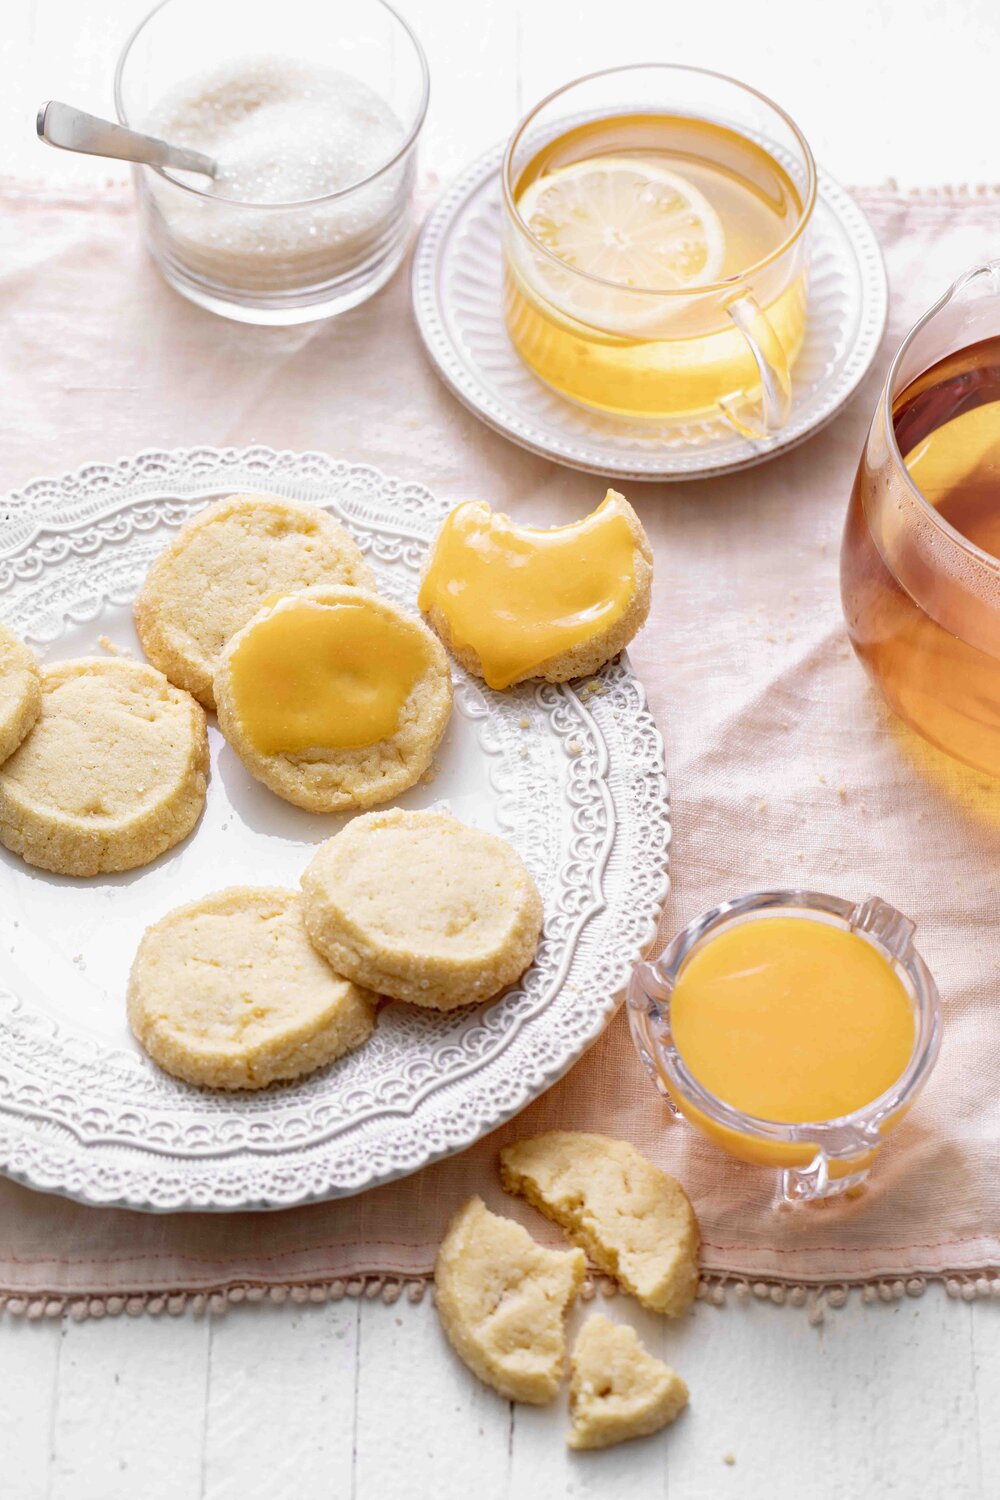 How to make lemon curd with shortbread cookies